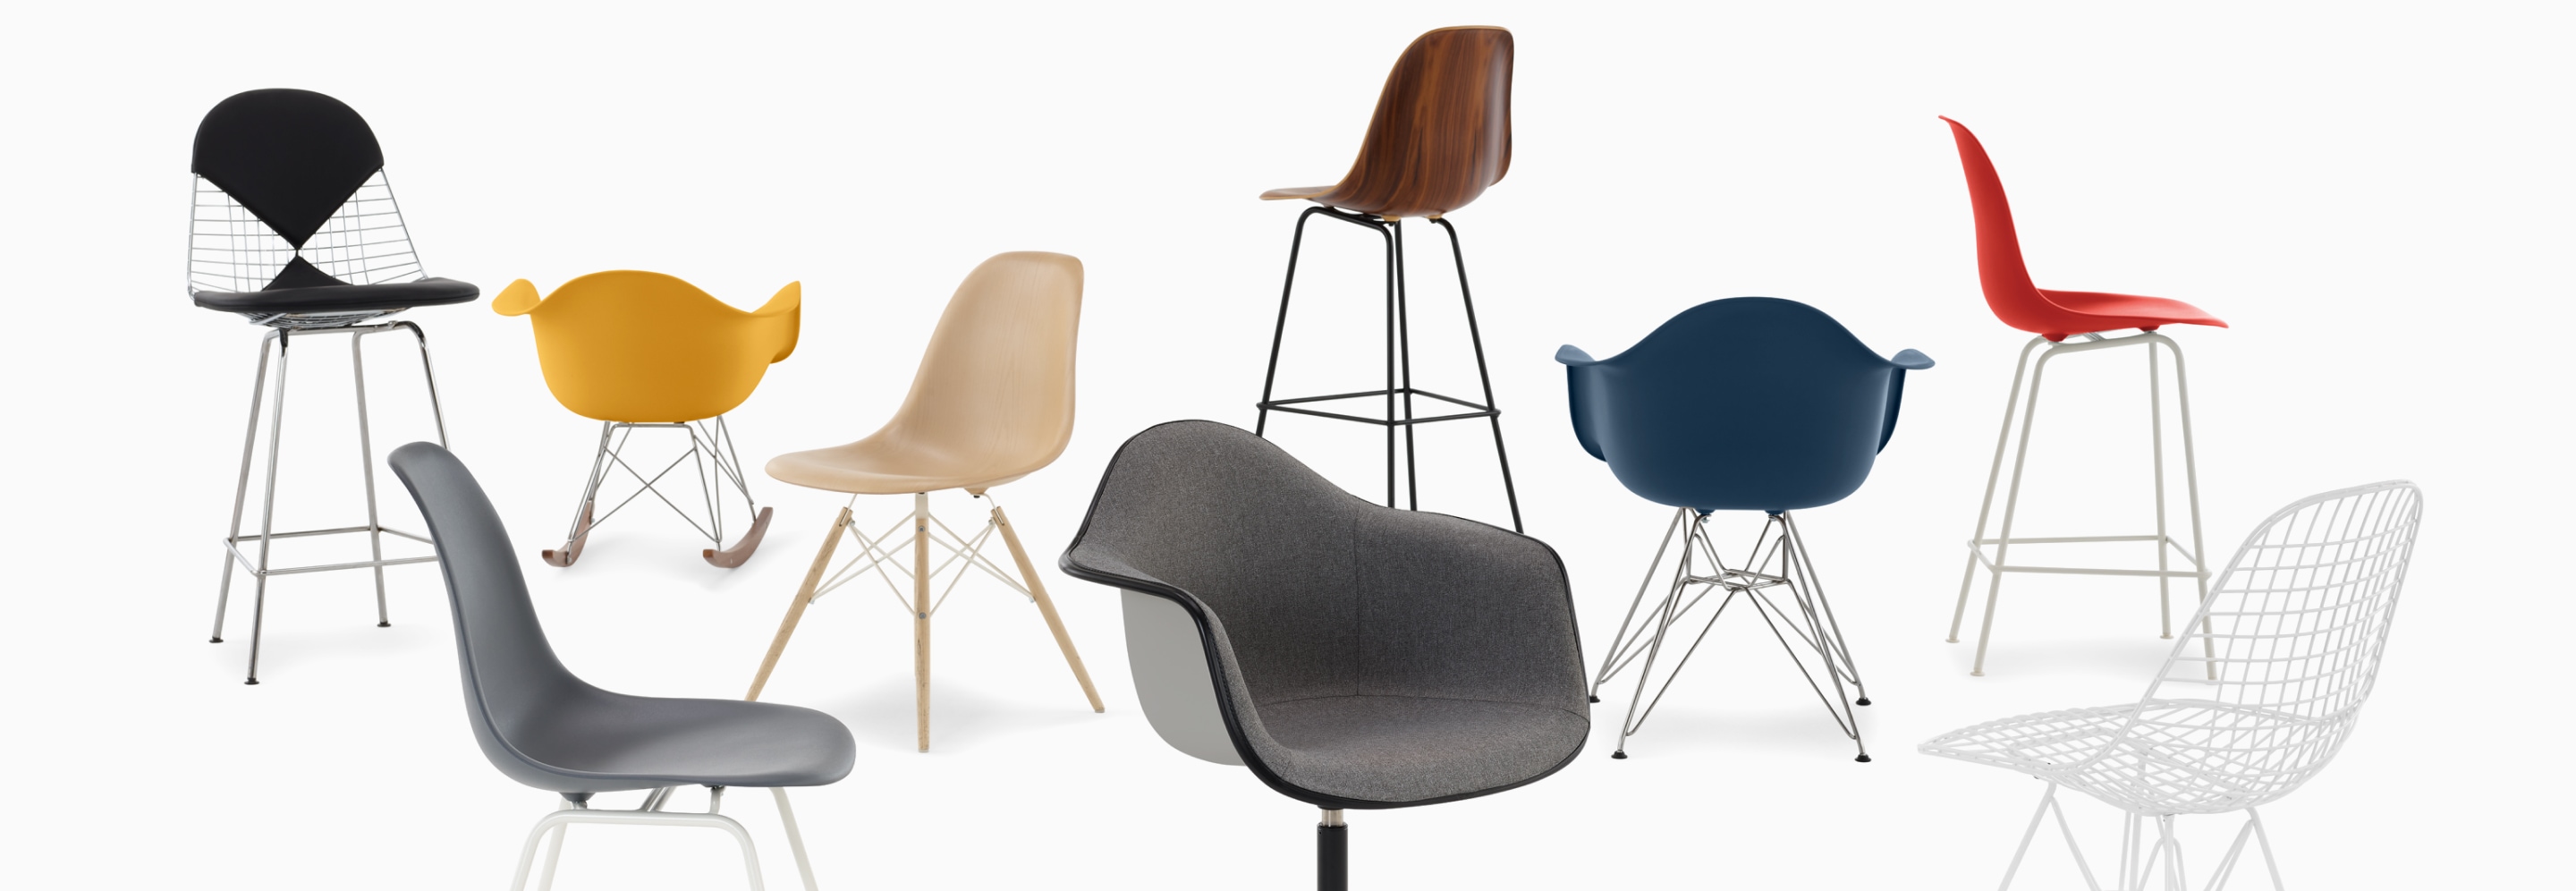 Eames Shell Chair Family - Seating - Herman Miller